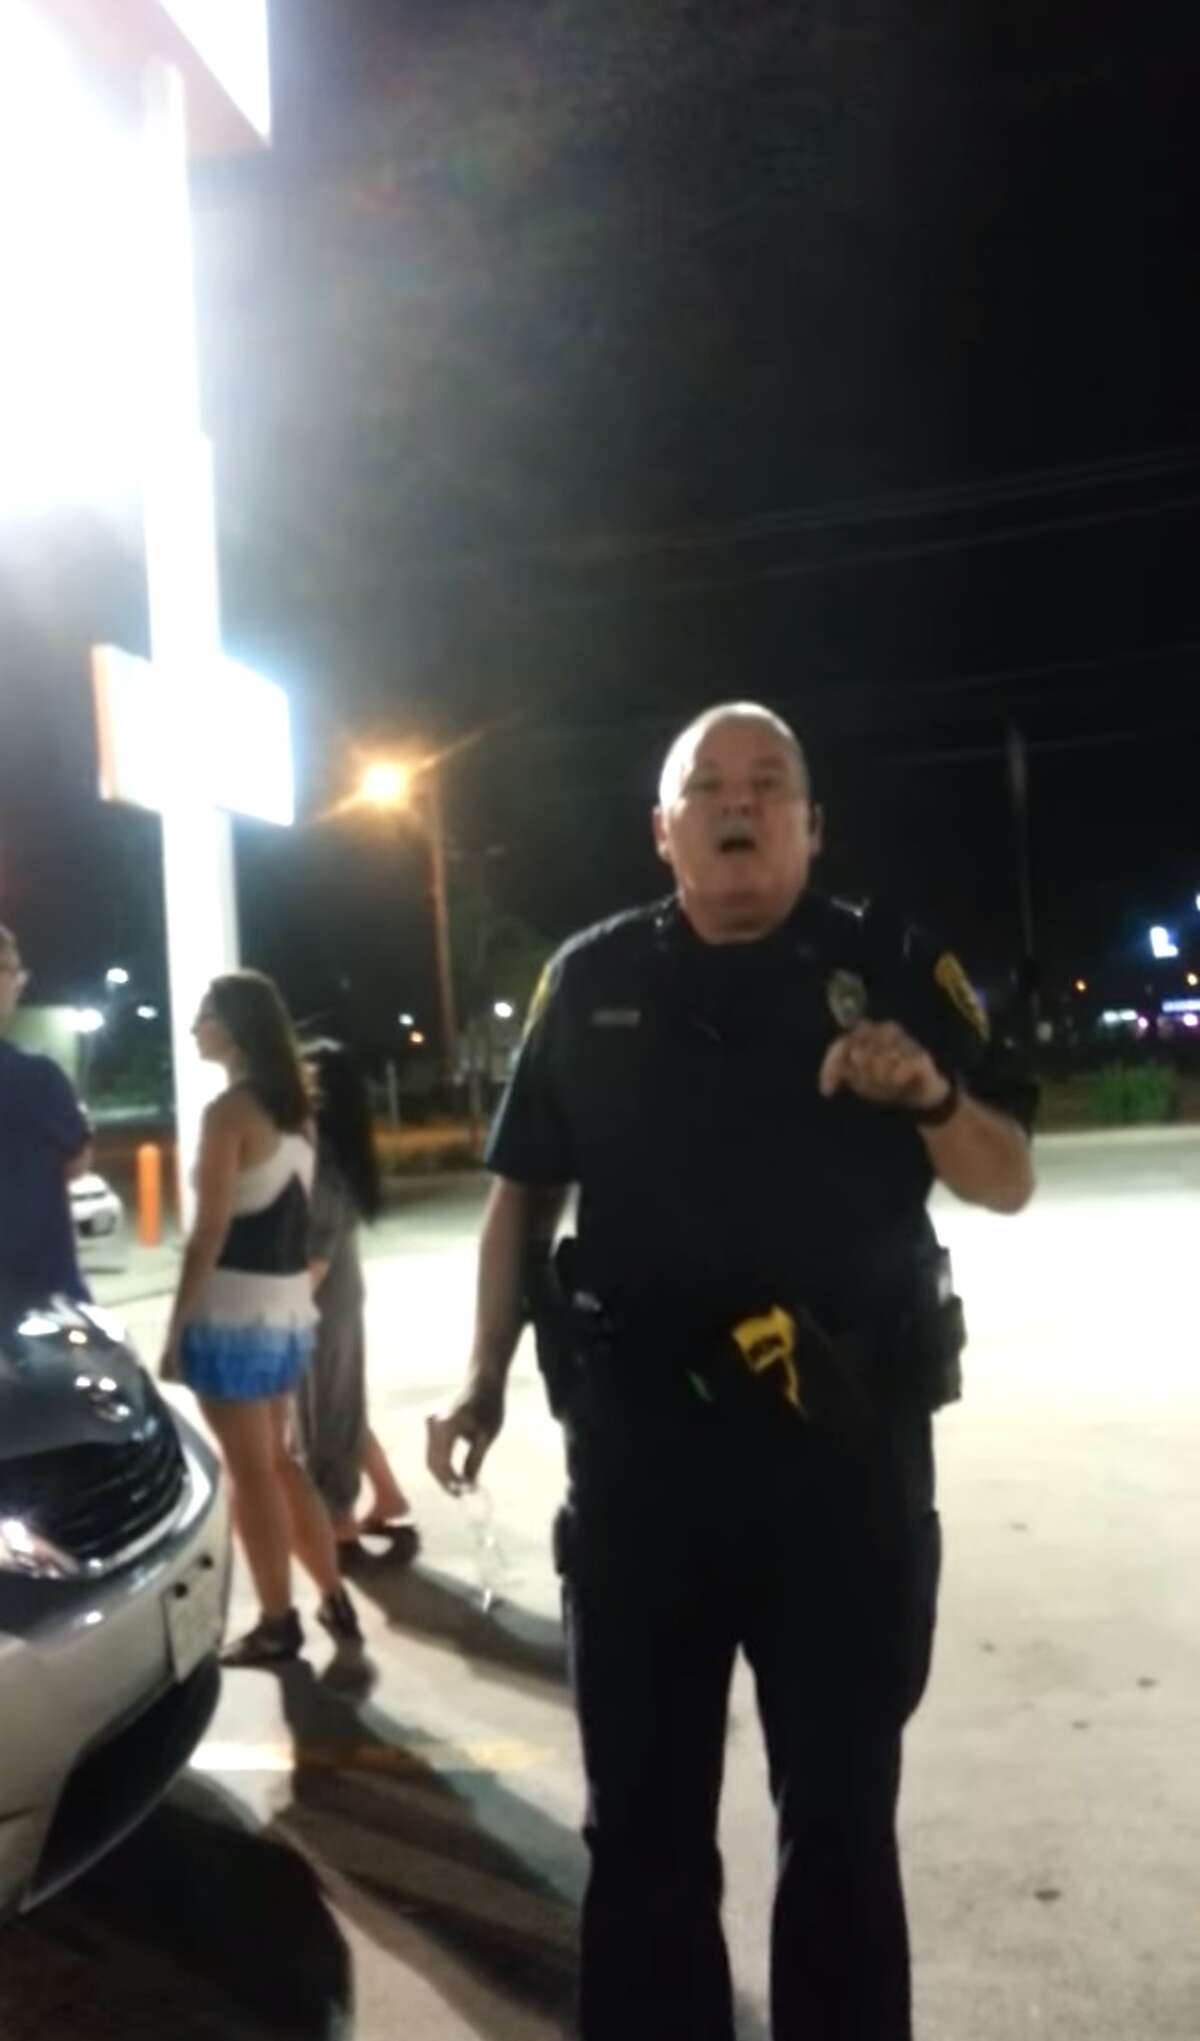 Texas Cop Resigns After Putting Woman In Chokehold While She Filmed Arrest